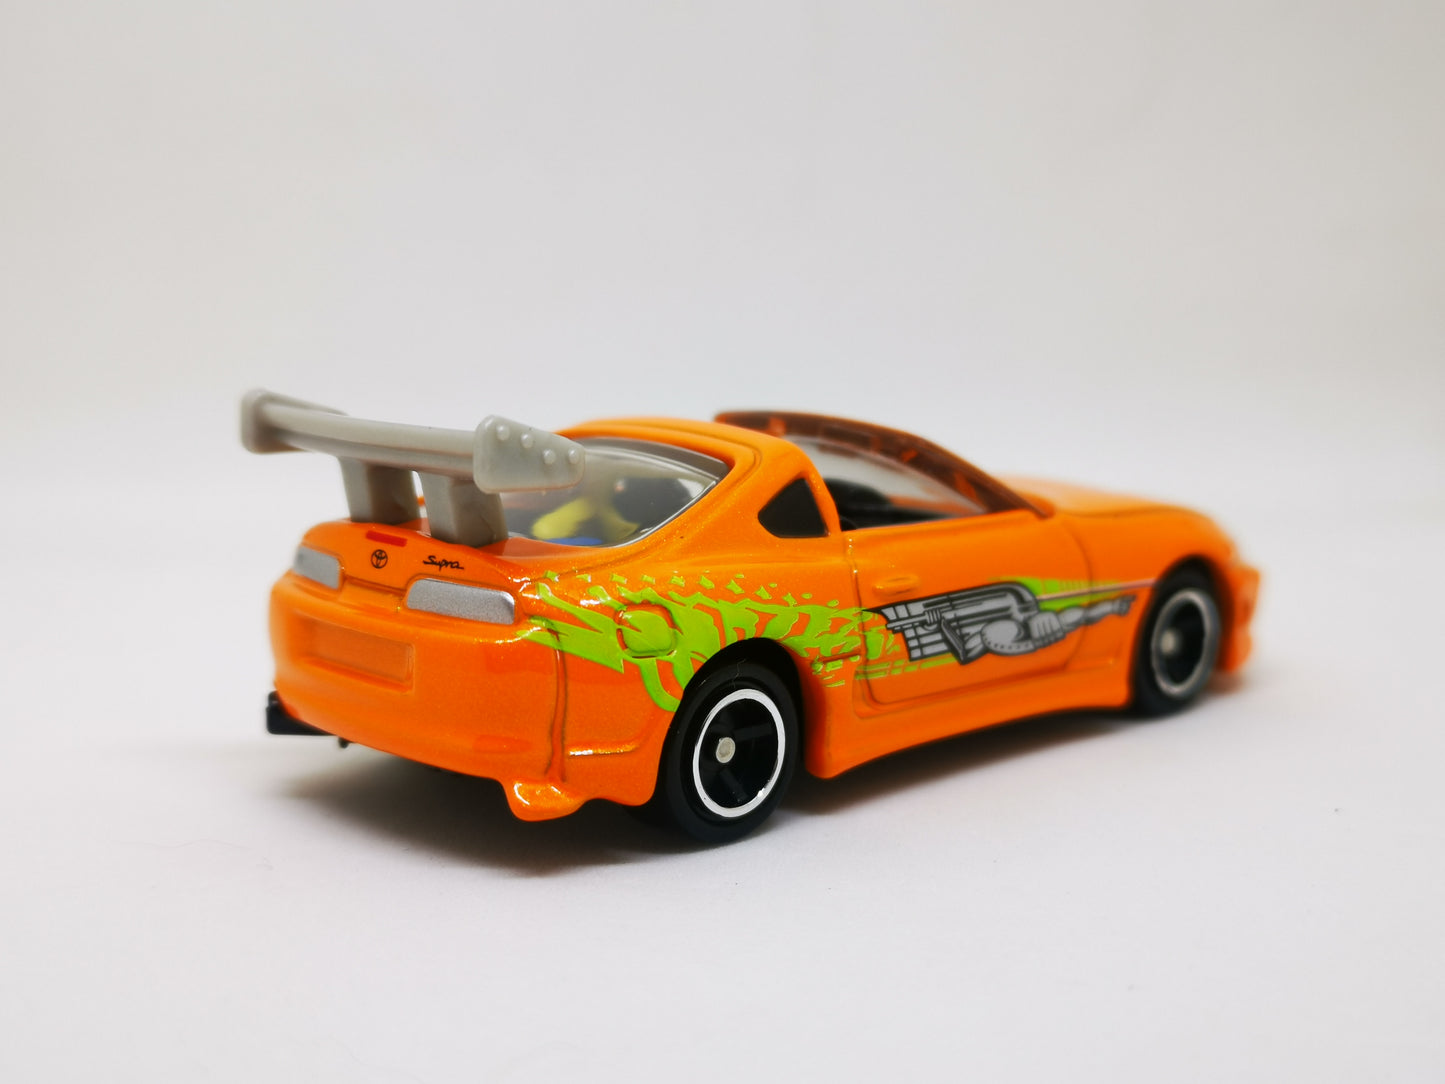 Tomica #148 The Fast and the Furious Toyota Supra Wild Speed 1:64 Scale